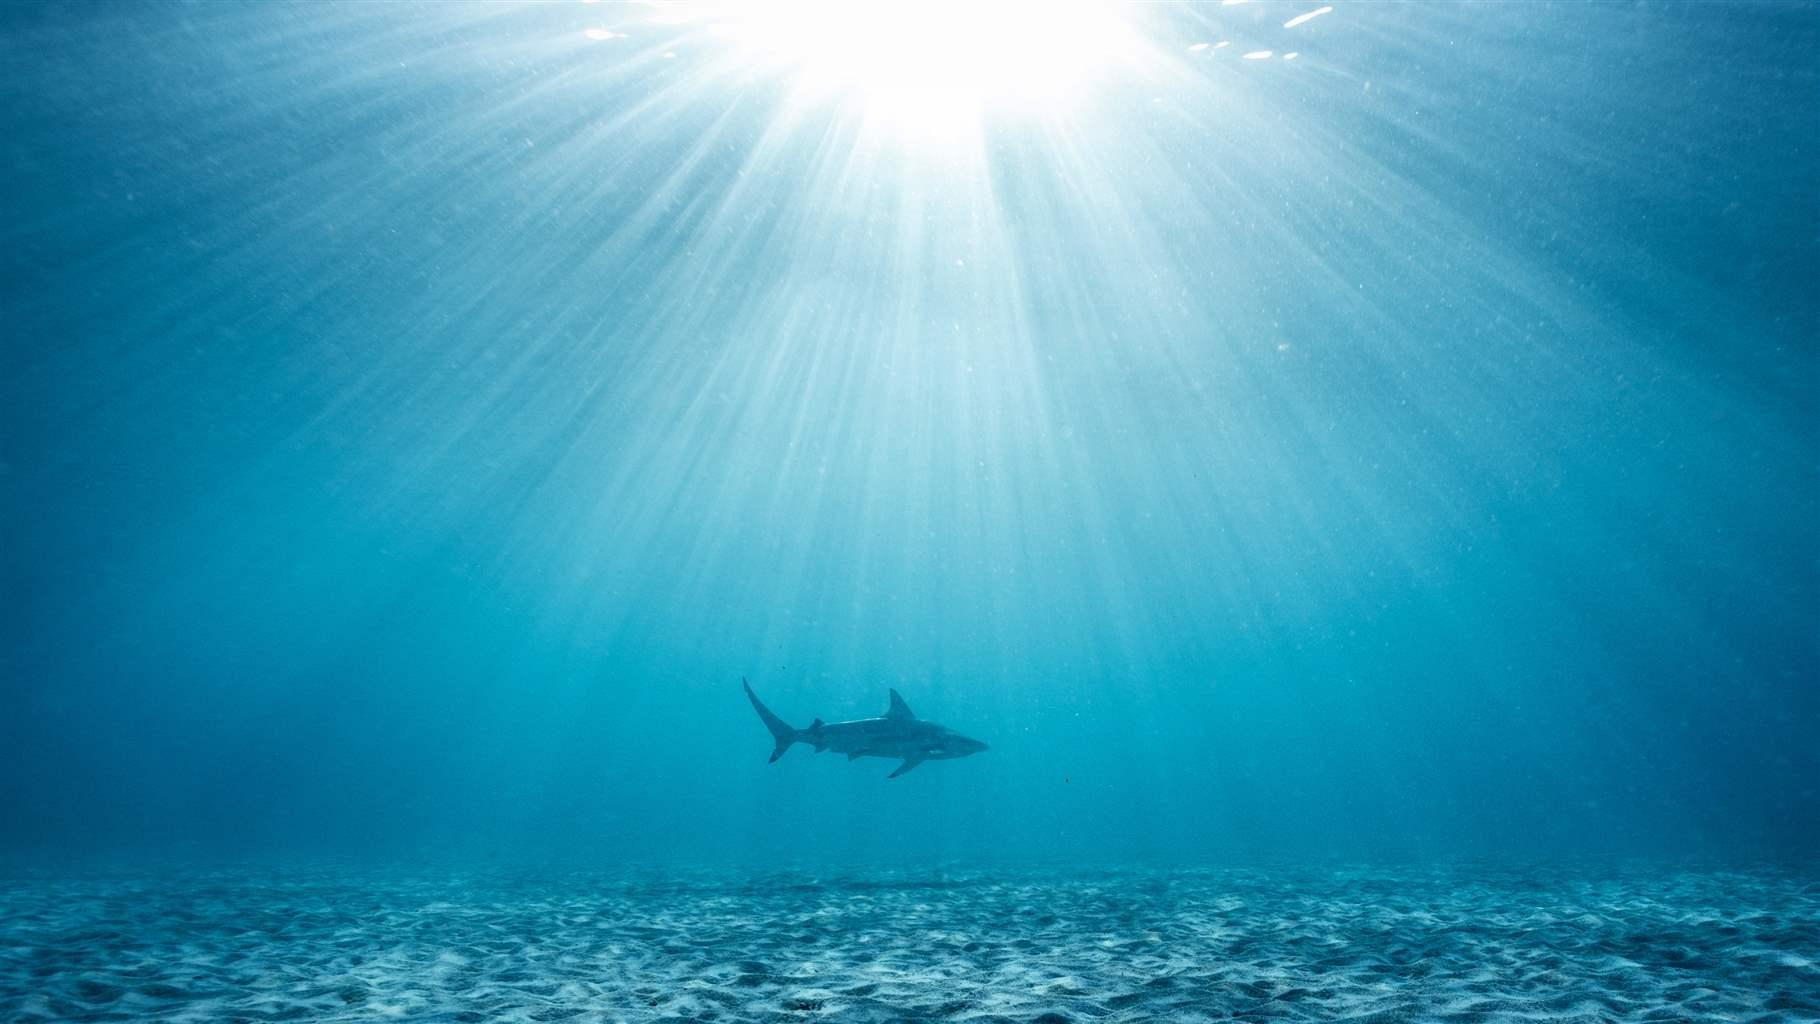 A shark illuminated by beams of sunlight while swimming at the bottom of the ocean.